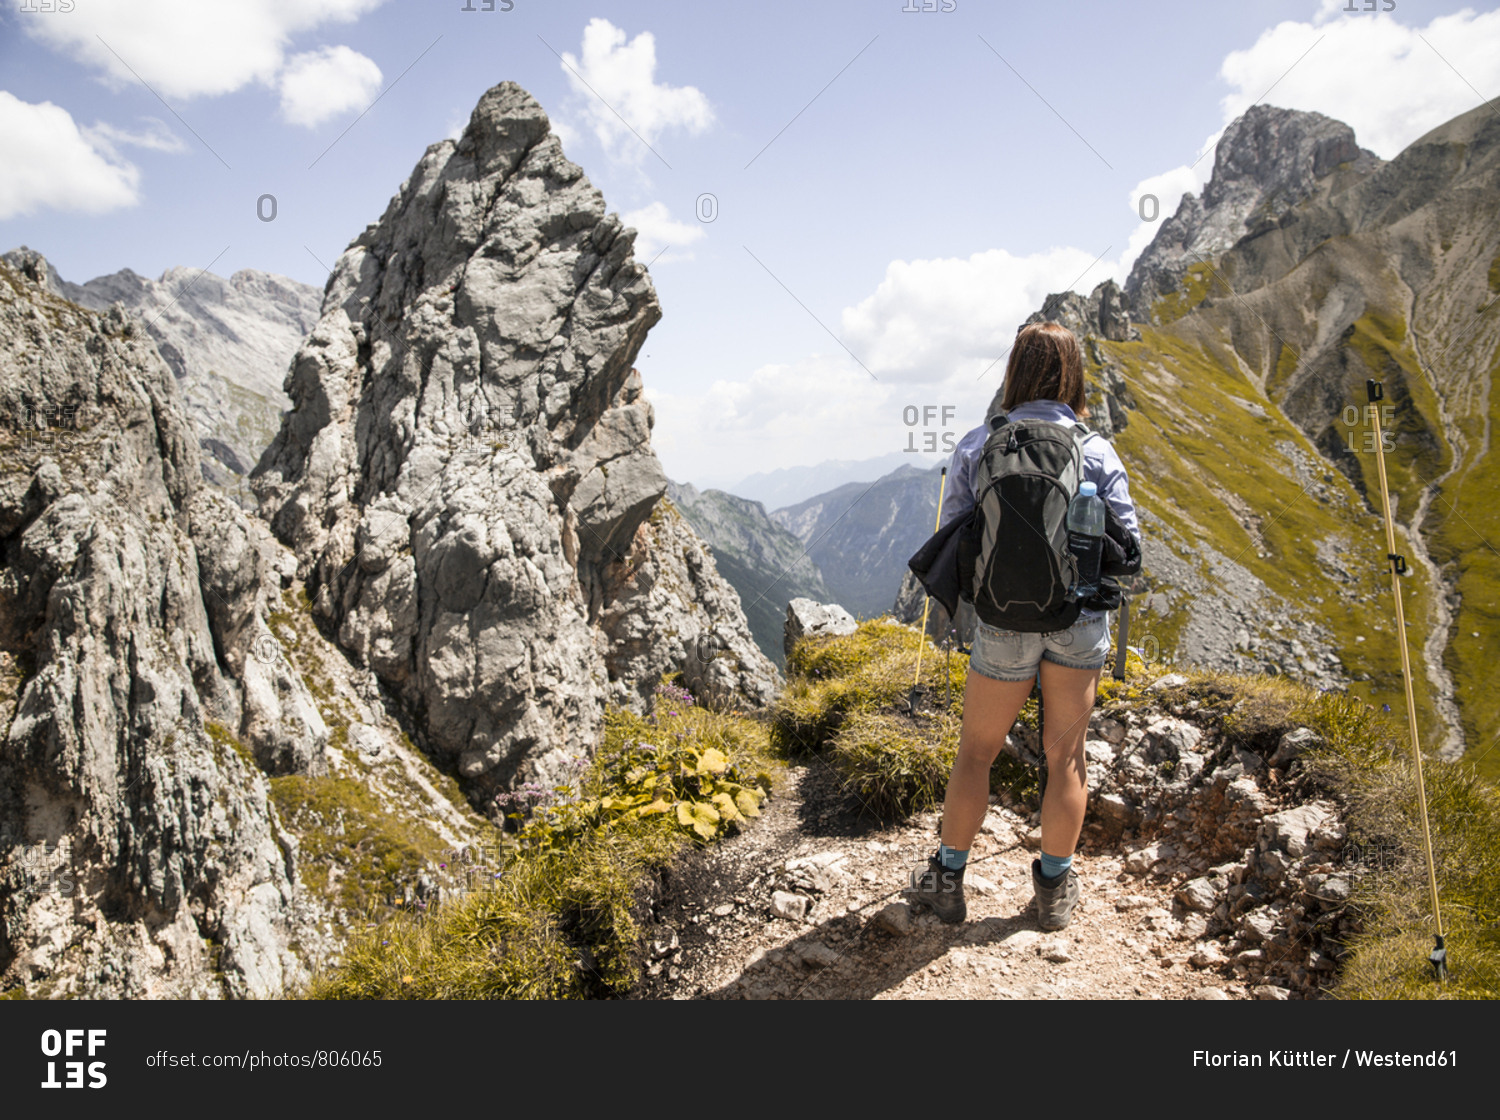 Austria- Tyrol- woman on a hiking trip in the mountains looking at view